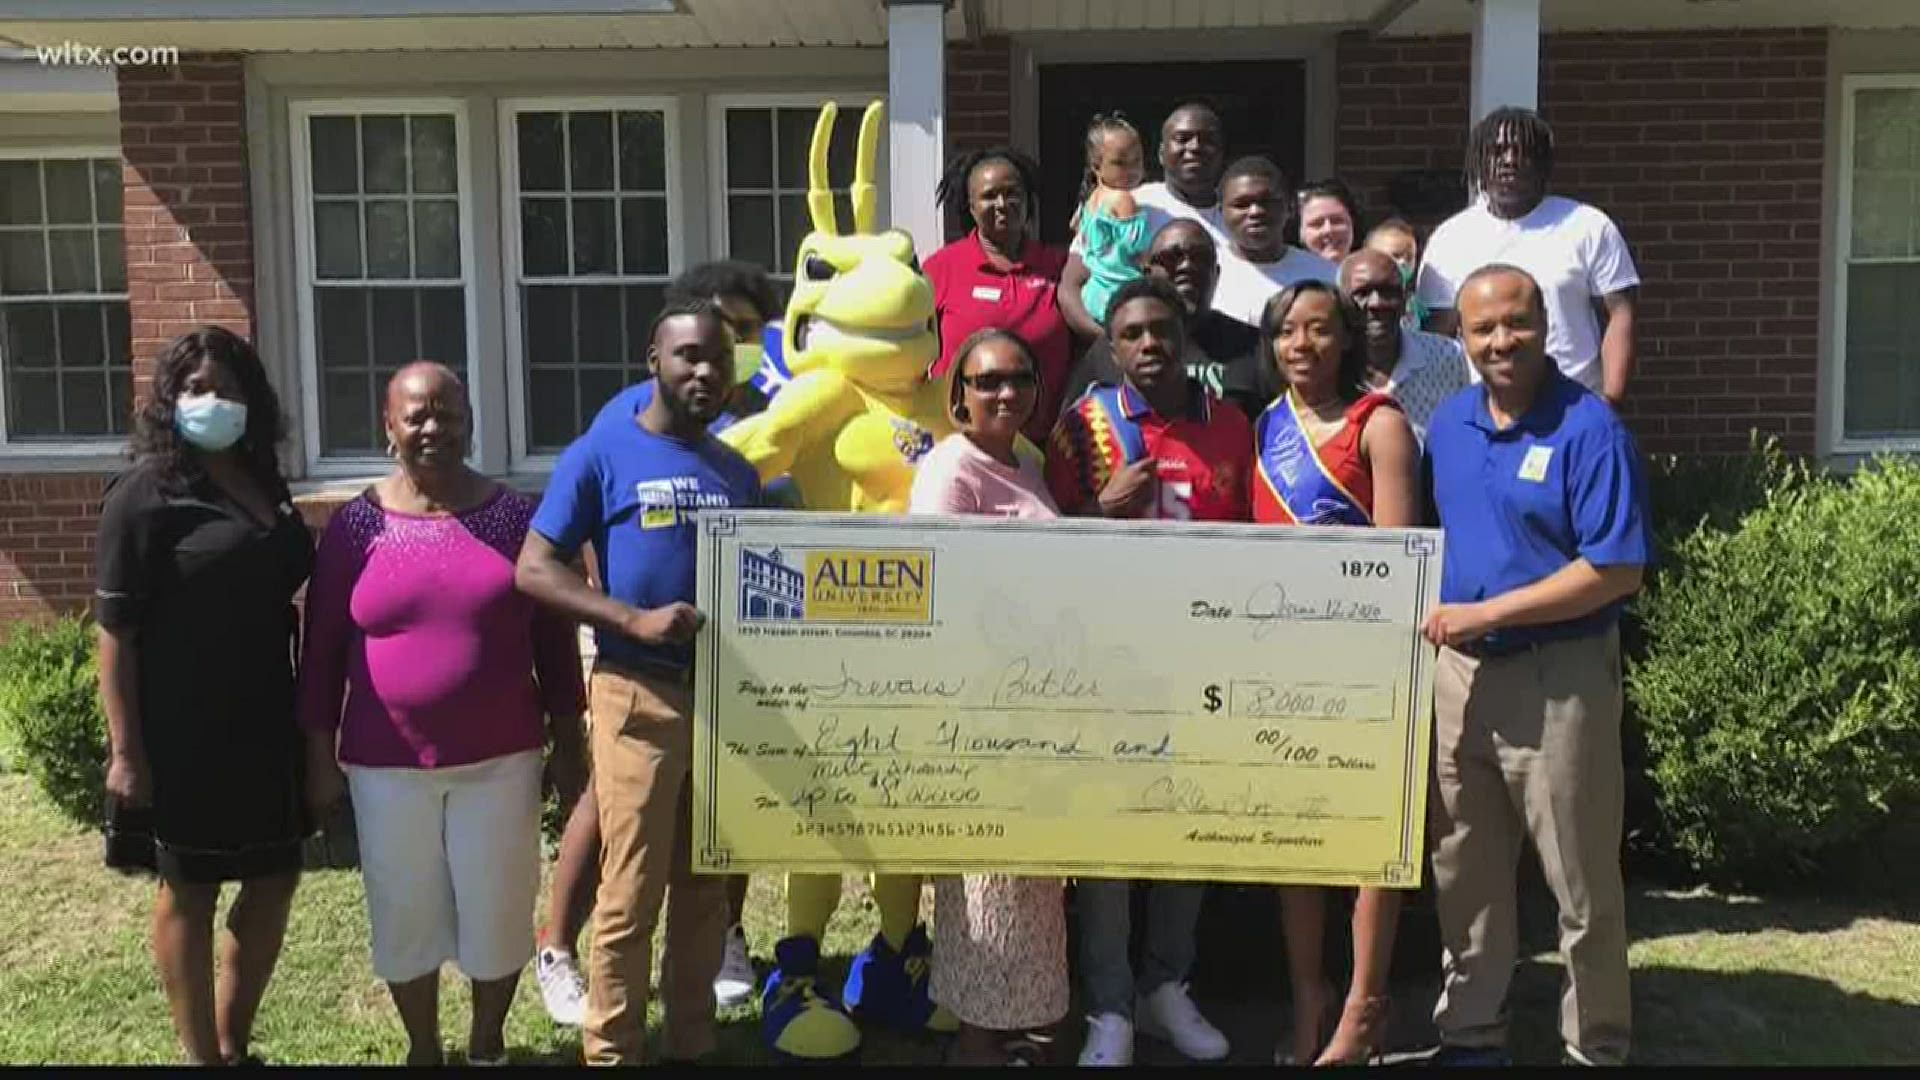 The 'All that can be imagined' Scholarship Tour has been traveling all around South Carolina and beyond to present scholarships to future Allen University students.